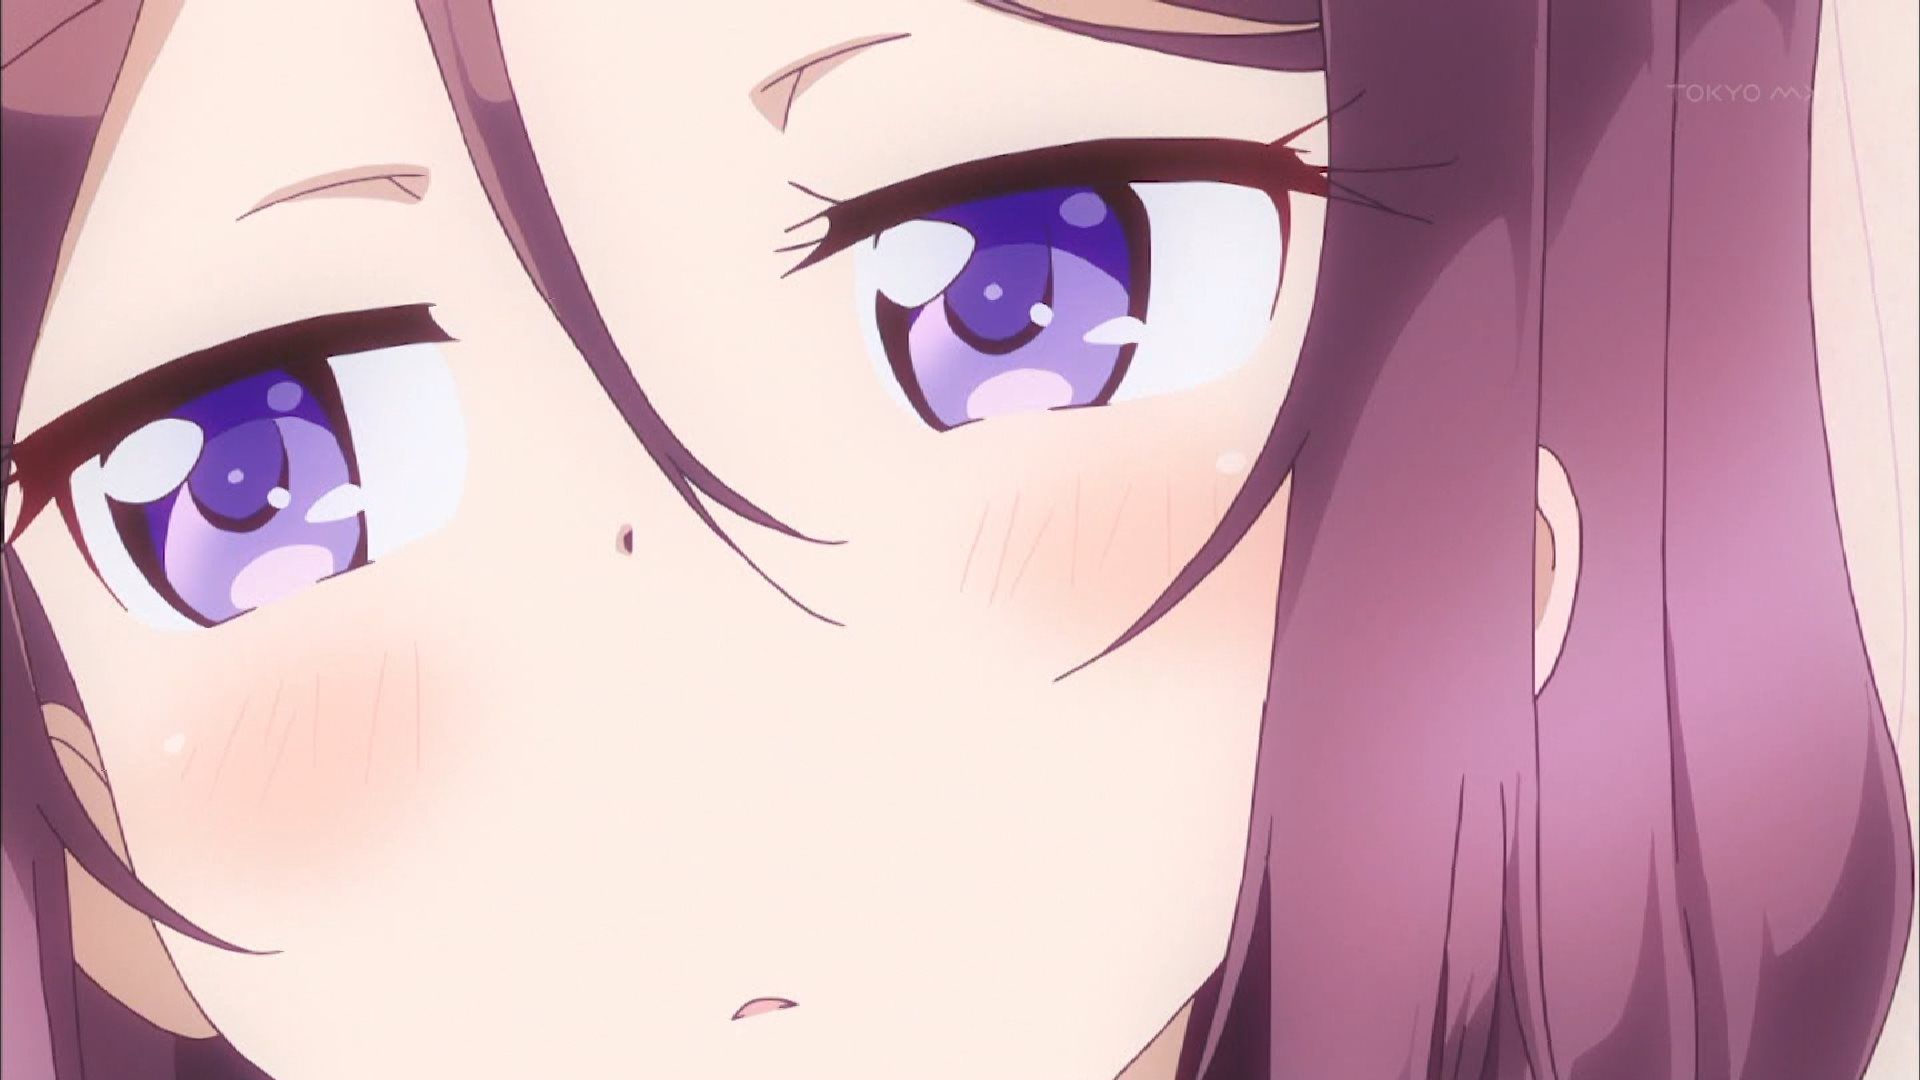 [Artificial mouth times] "NEW GAME! "Of all nine episodes, Yuri hifumi nude too たまらな of wwwwwwwww 10